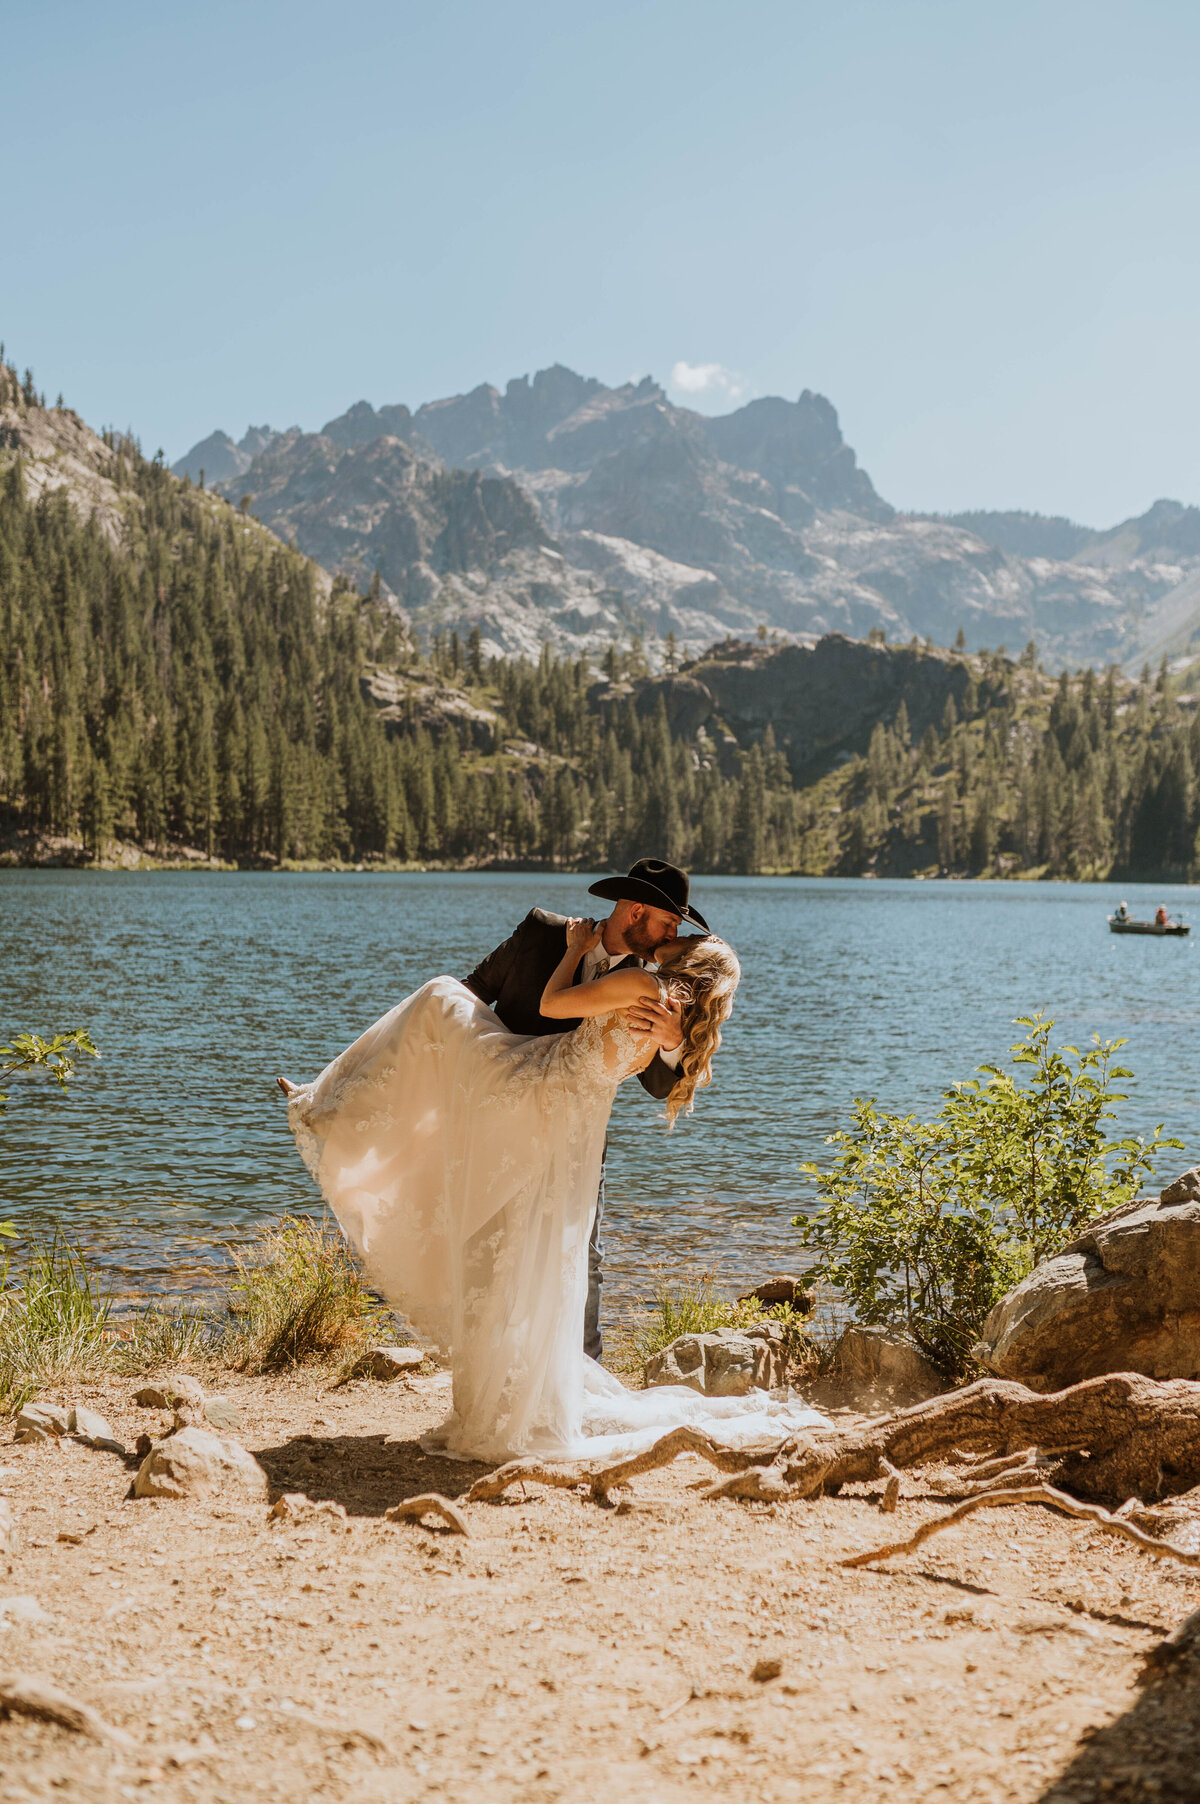 A couple getting married at Sardine Lake